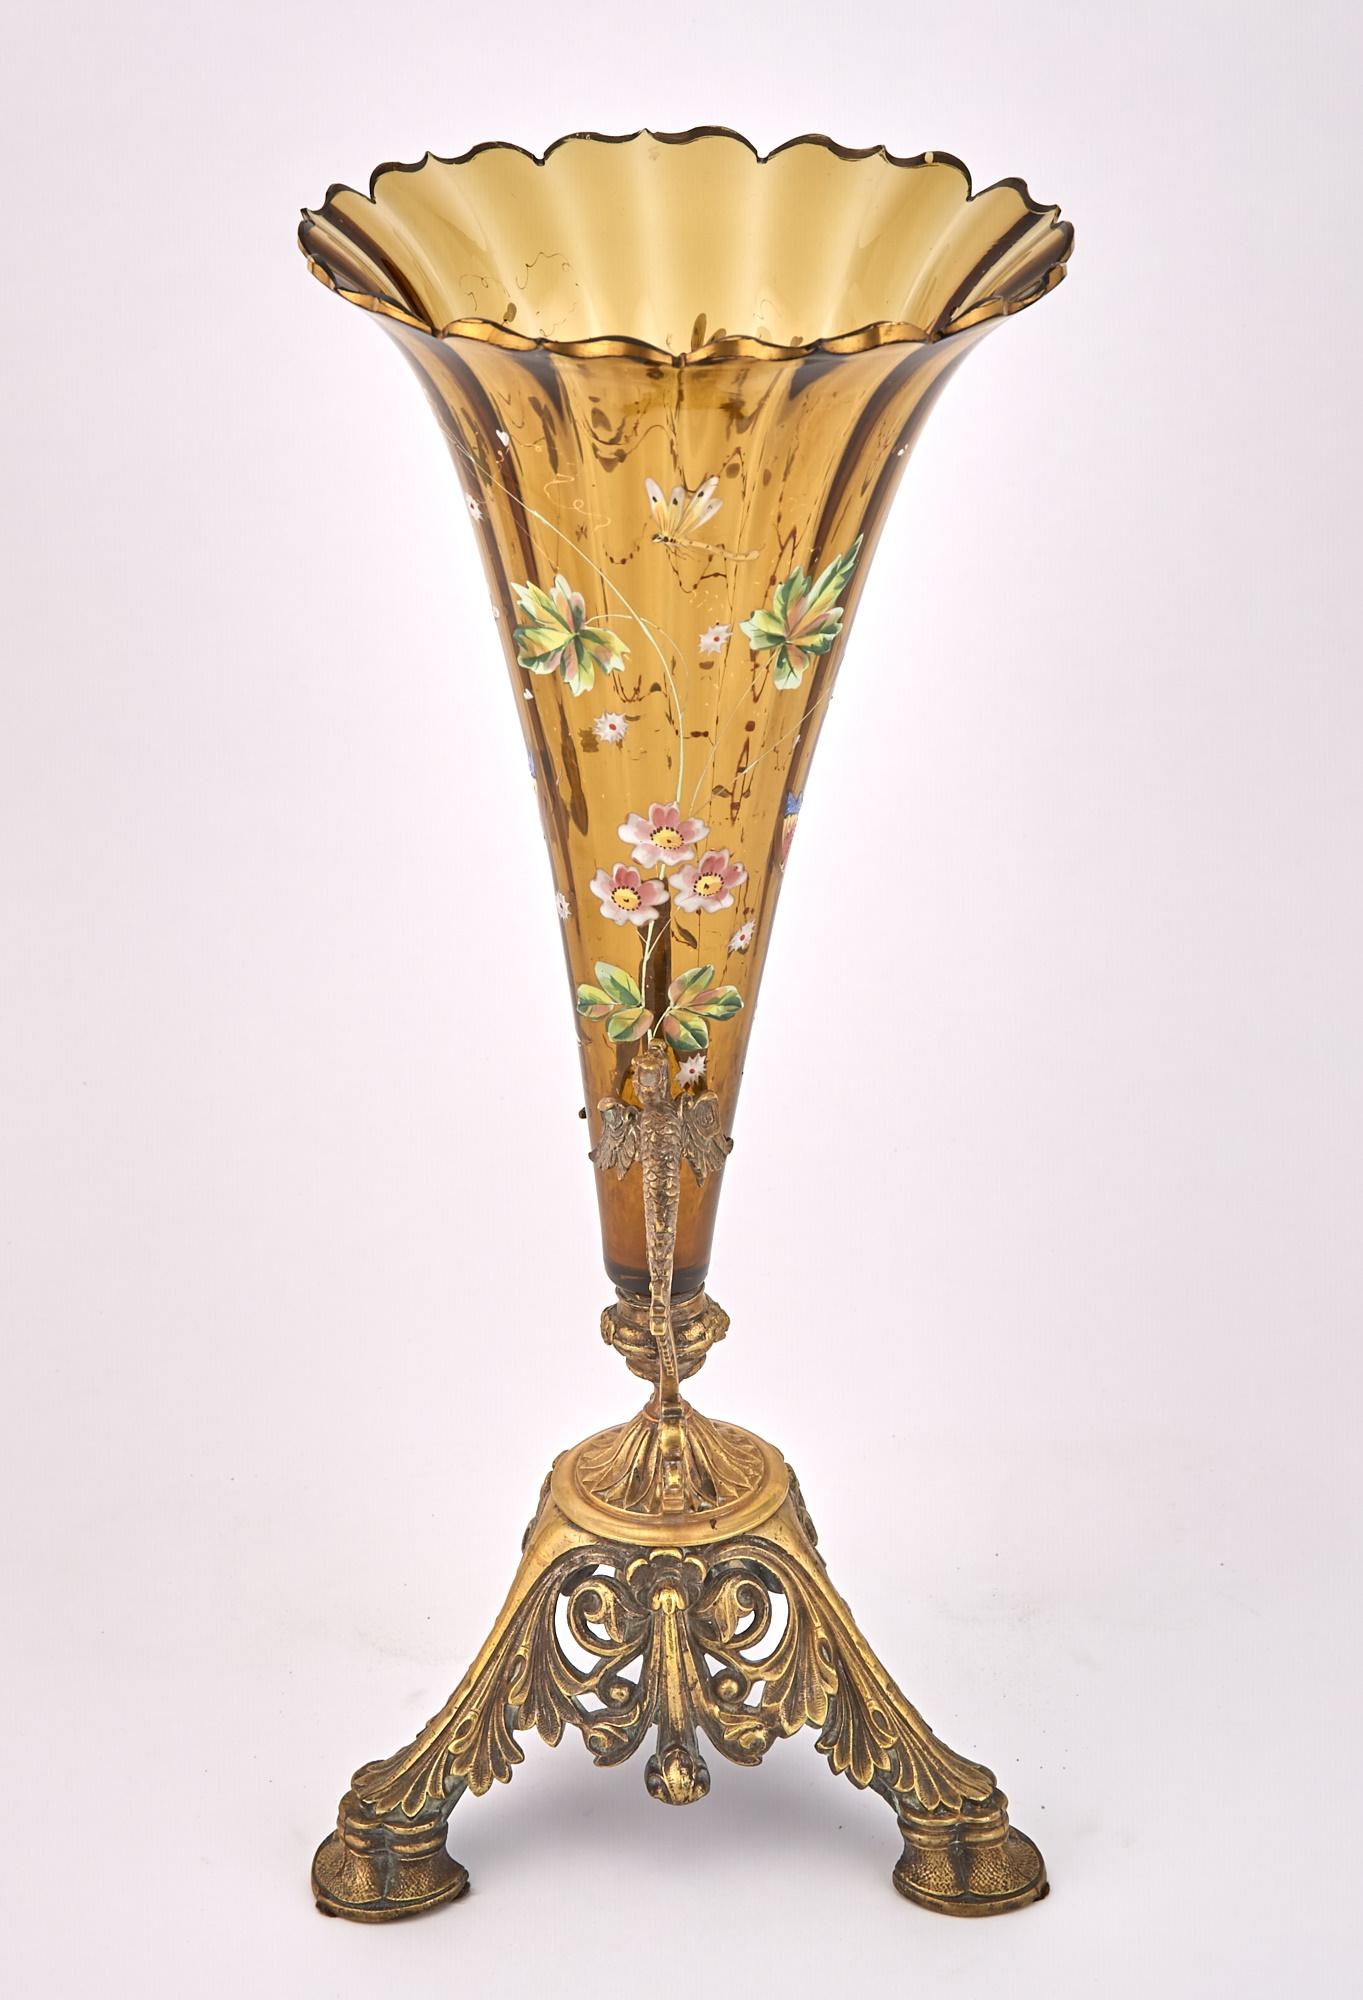 Transport yourself to the opulence of the mid-19th century with our exquisite French enameled art glass decorative vase. This captivating piece seamlessly blends artistry and craftsmanship, making it a standout addition to any collection.
Admire the